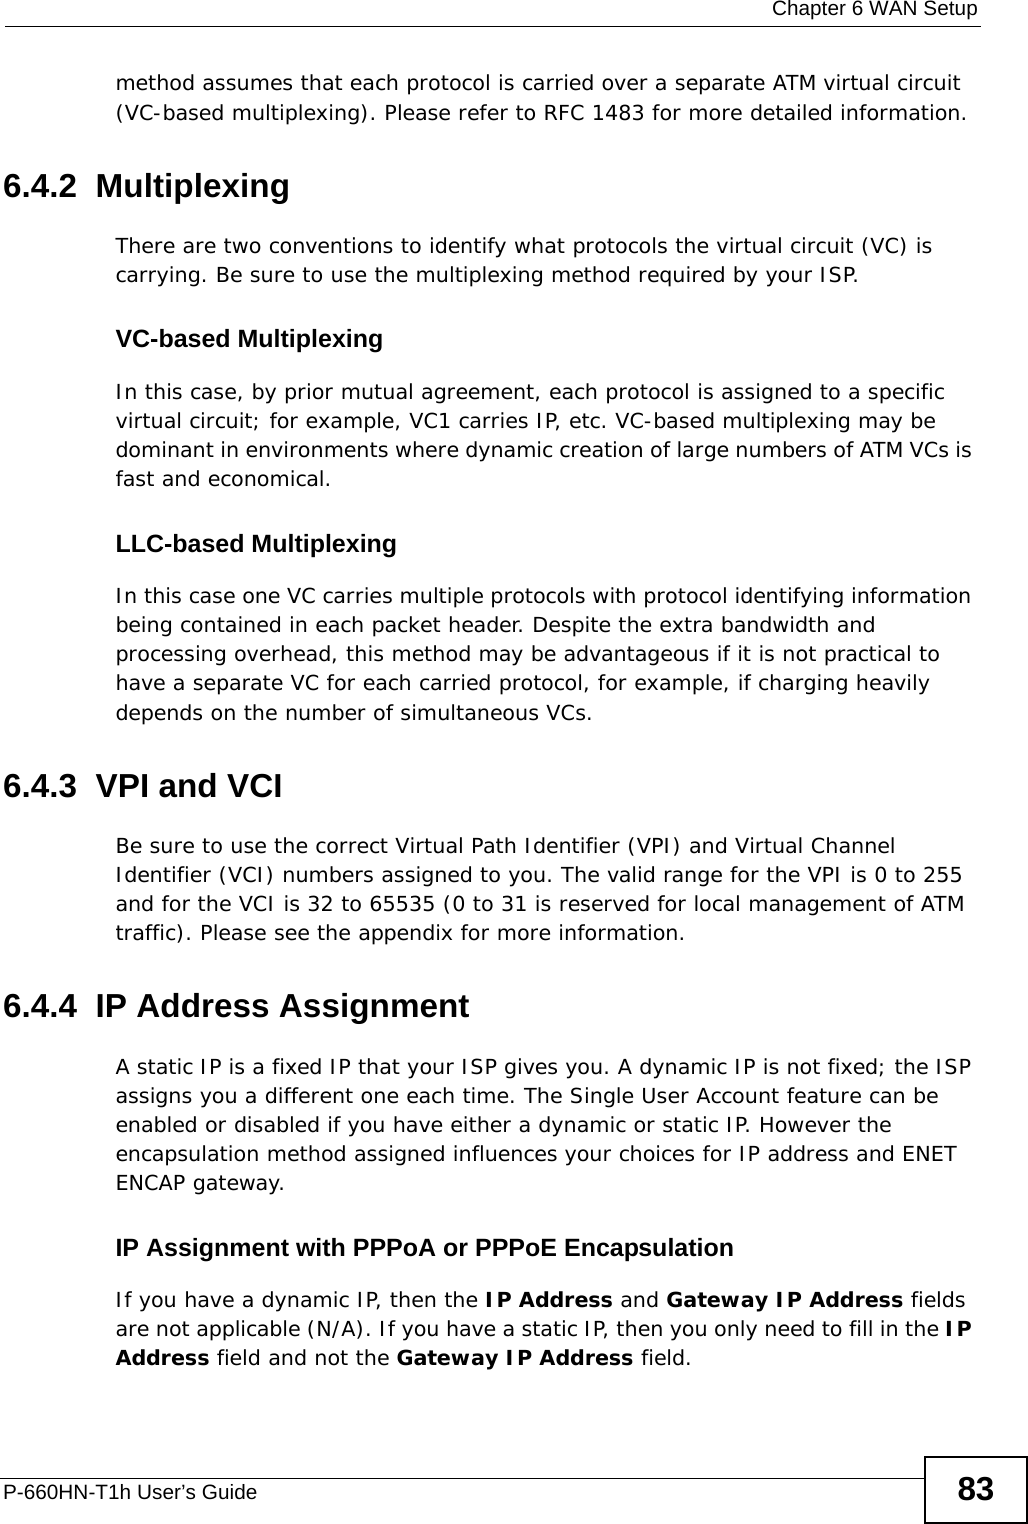  Chapter 6 WAN SetupP-660HN-T1h User’s Guide 83method assumes that each protocol is carried over a separate ATM virtual circuit (VC-based multiplexing). Please refer to RFC 1483 for more detailed information.6.4.2  MultiplexingThere are two conventions to identify what protocols the virtual circuit (VC) is carrying. Be sure to use the multiplexing method required by your ISP.VC-based MultiplexingIn this case, by prior mutual agreement, each protocol is assigned to a specific virtual circuit; for example, VC1 carries IP, etc. VC-based multiplexing may be dominant in environments where dynamic creation of large numbers of ATM VCs is fast and economical.LLC-based MultiplexingIn this case one VC carries multiple protocols with protocol identifying information being contained in each packet header. Despite the extra bandwidth and processing overhead, this method may be advantageous if it is not practical to have a separate VC for each carried protocol, for example, if charging heavily depends on the number of simultaneous VCs.6.4.3  VPI and VCIBe sure to use the correct Virtual Path Identifier (VPI) and Virtual Channel Identifier (VCI) numbers assigned to you. The valid range for the VPI is 0 to 255 and for the VCI is 32 to 65535 (0 to 31 is reserved for local management of ATM traffic). Please see the appendix for more information.6.4.4  IP Address AssignmentA static IP is a fixed IP that your ISP gives you. A dynamic IP is not fixed; the ISP assigns you a different one each time. The Single User Account feature can be enabled or disabled if you have either a dynamic or static IP. However the encapsulation method assigned influences your choices for IP address and ENET ENCAP gateway.IP Assignment with PPPoA or PPPoE EncapsulationIf you have a dynamic IP, then the IP Address and Gateway IP Address fields are not applicable (N/A). If you have a static IP, then you only need to fill in the IP Address field and not the Gateway IP Address field.